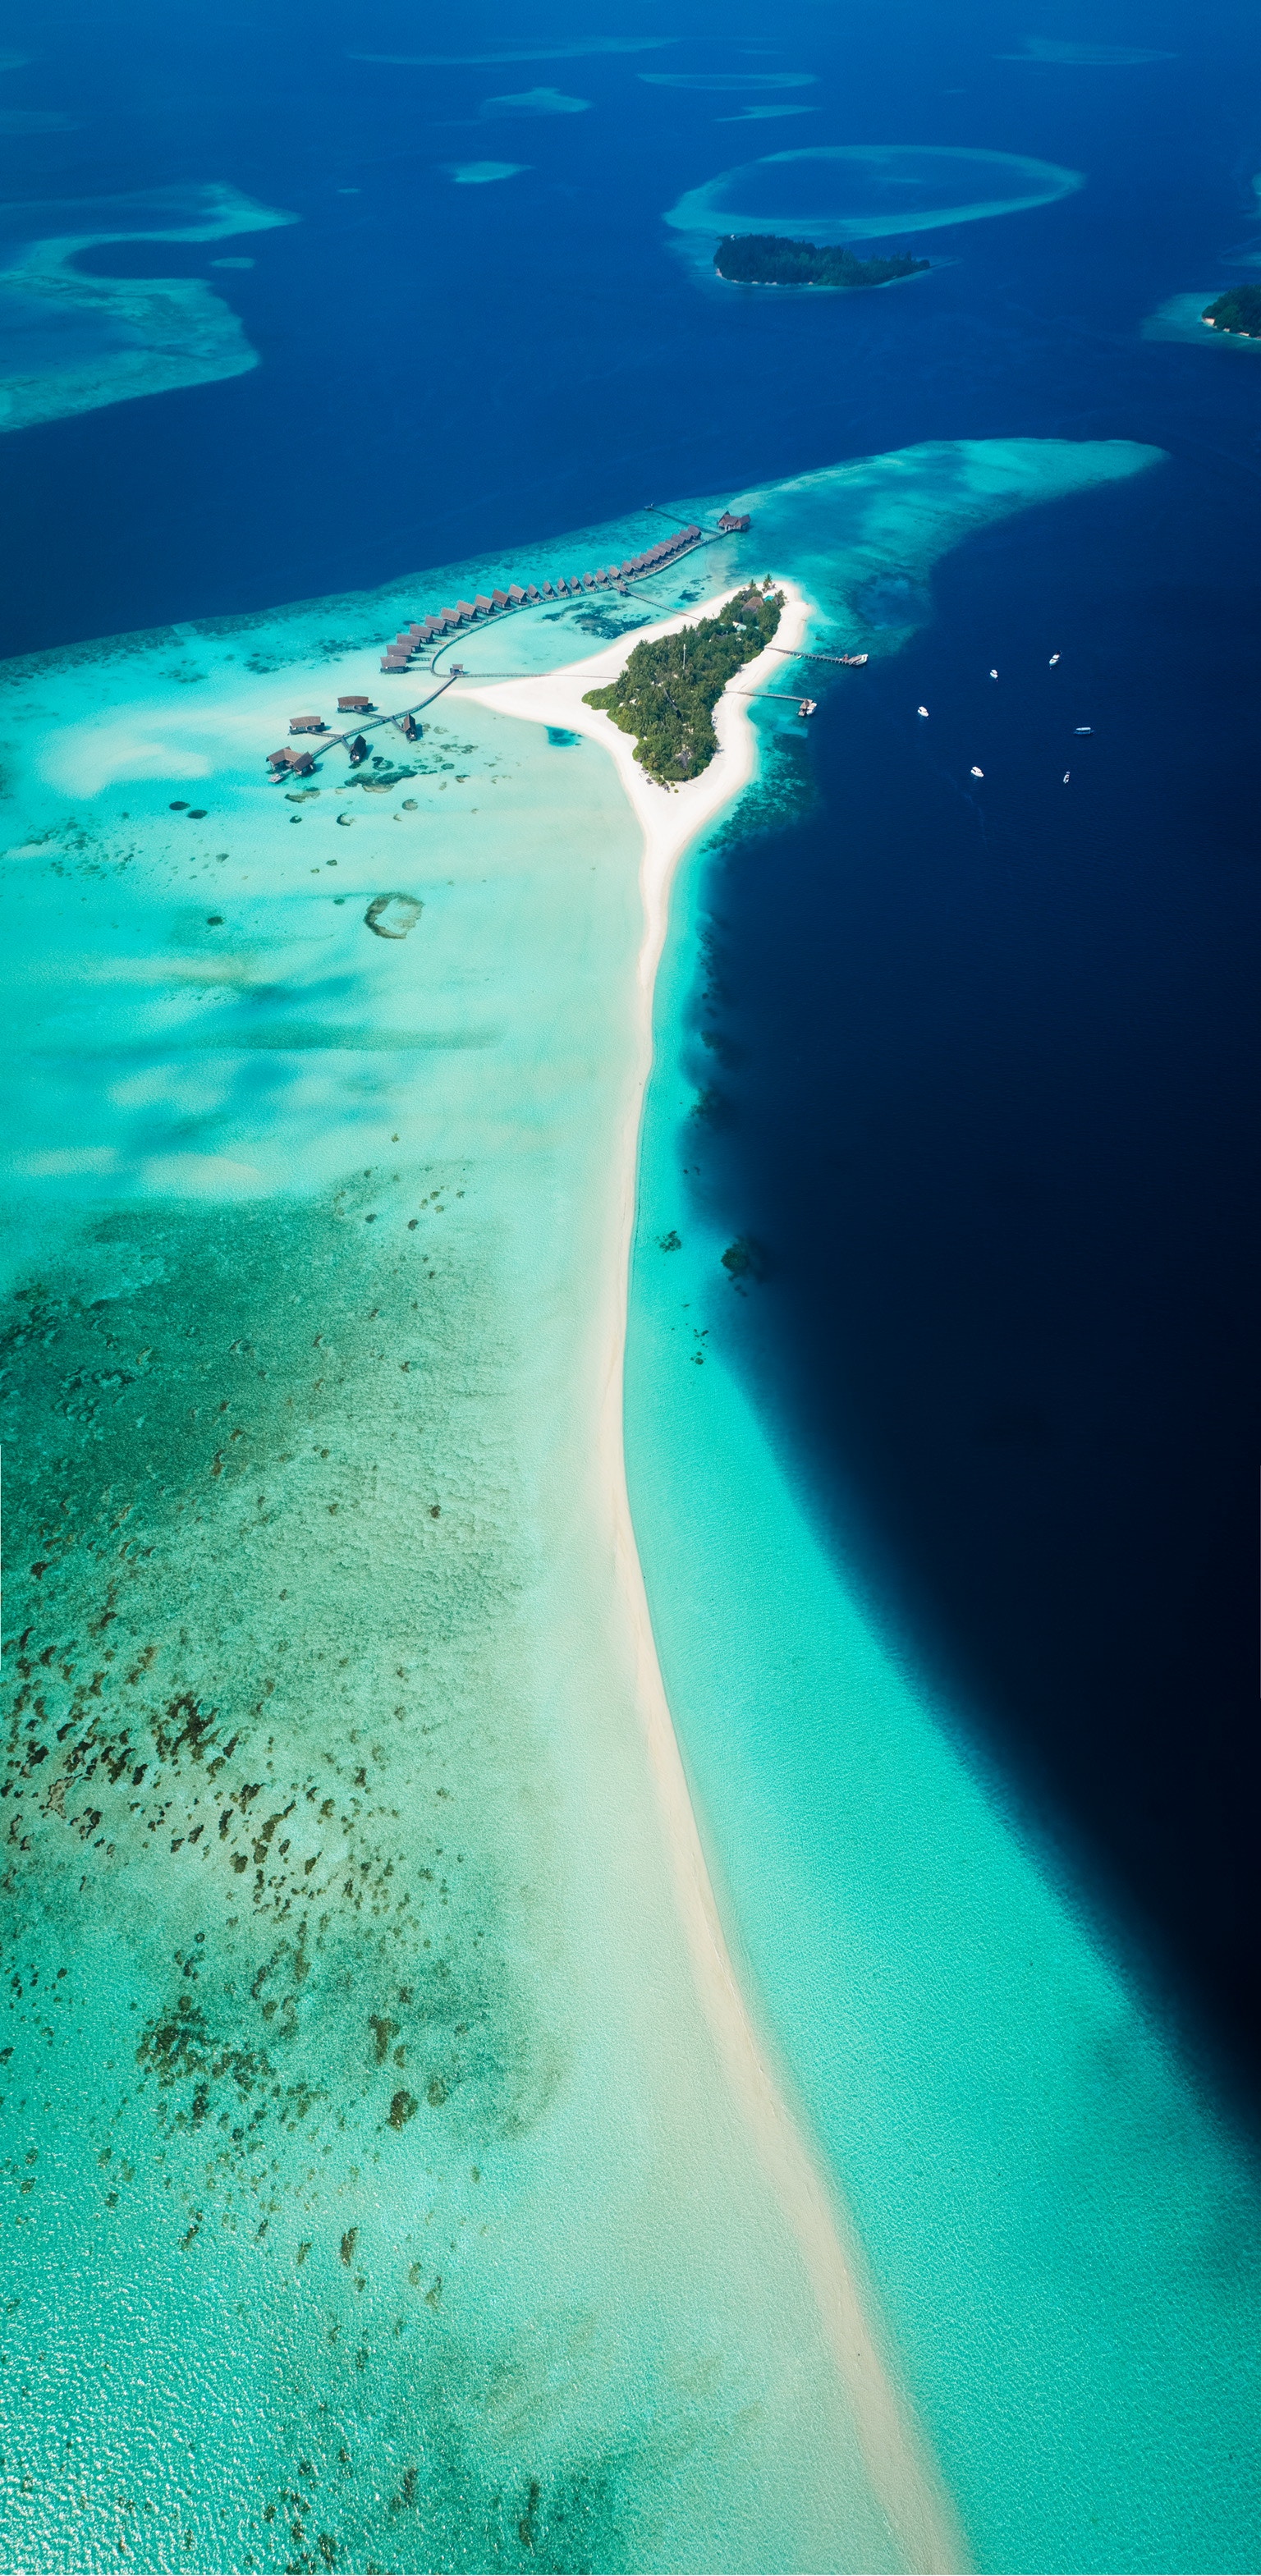 maldives, nature, view from above, ocean, tropics, island